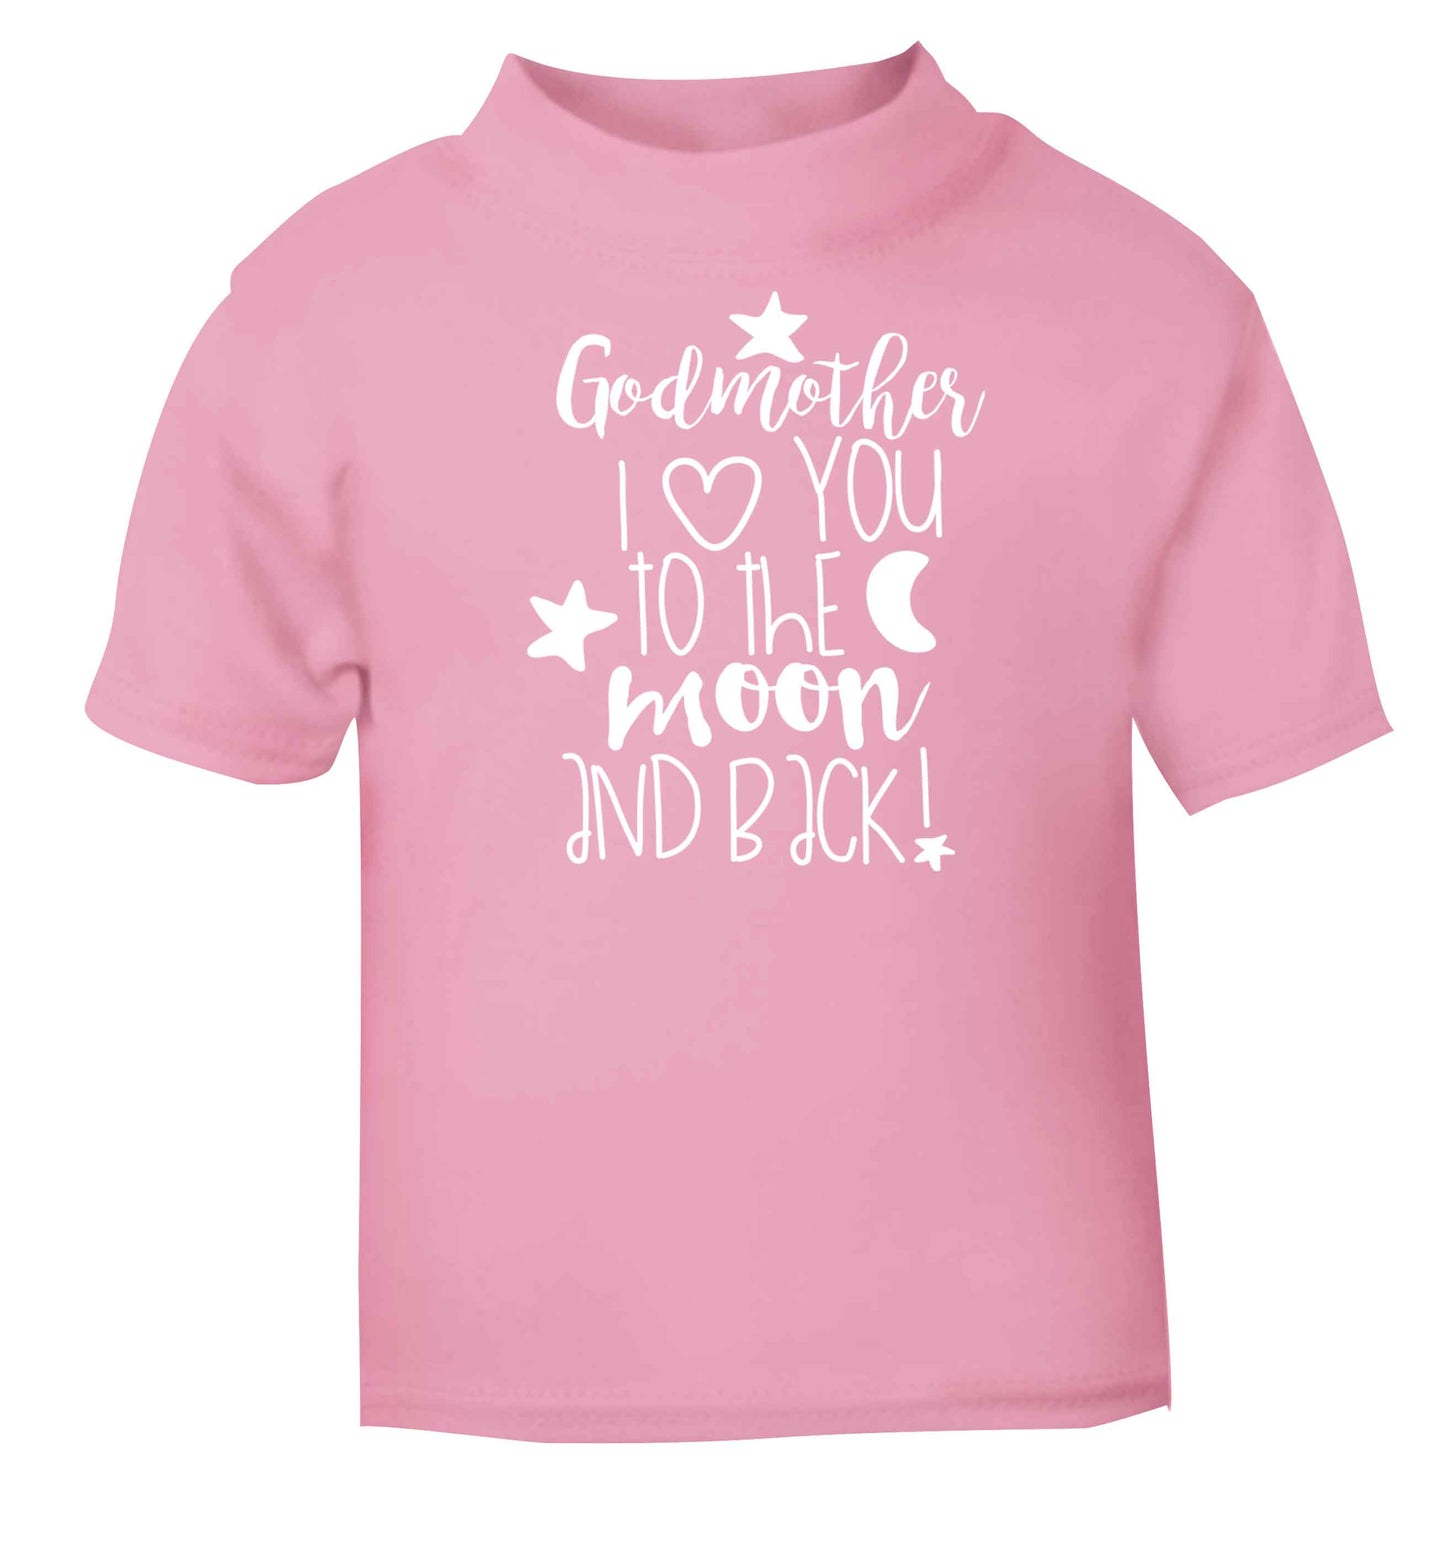 Godmother I love you to the moon and back light pink baby toddler Tshirt 2 Years